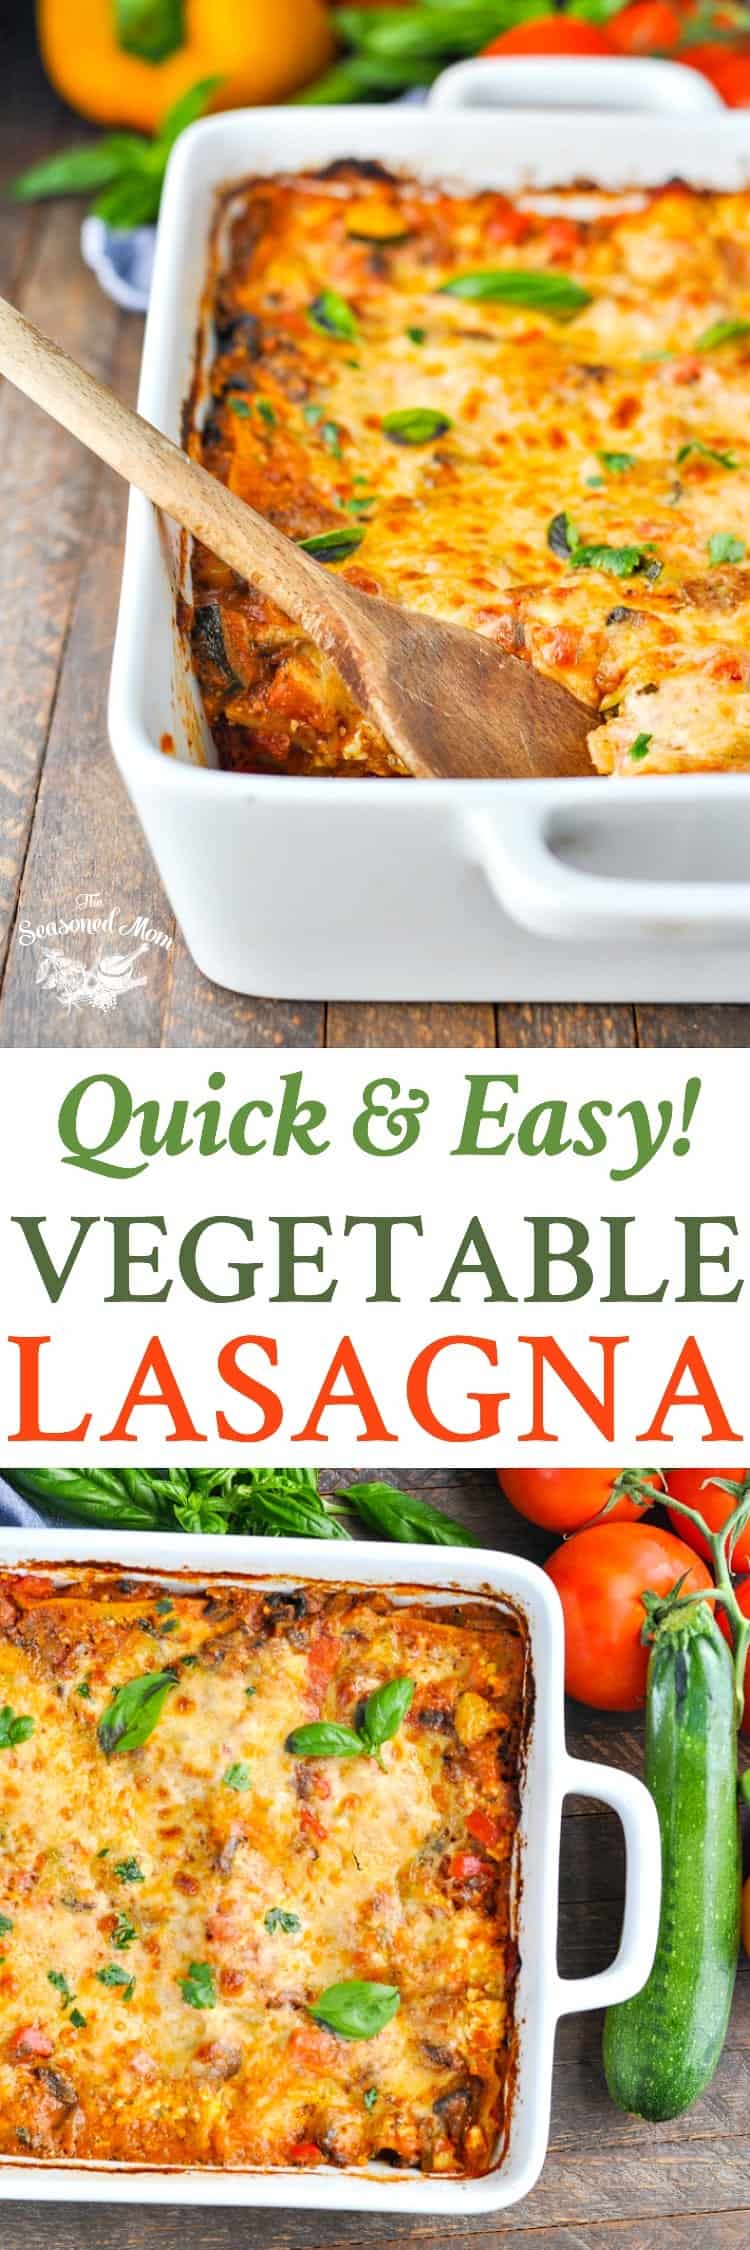 Quick and Easy Vegetable Lasagna - The Seasoned Mom